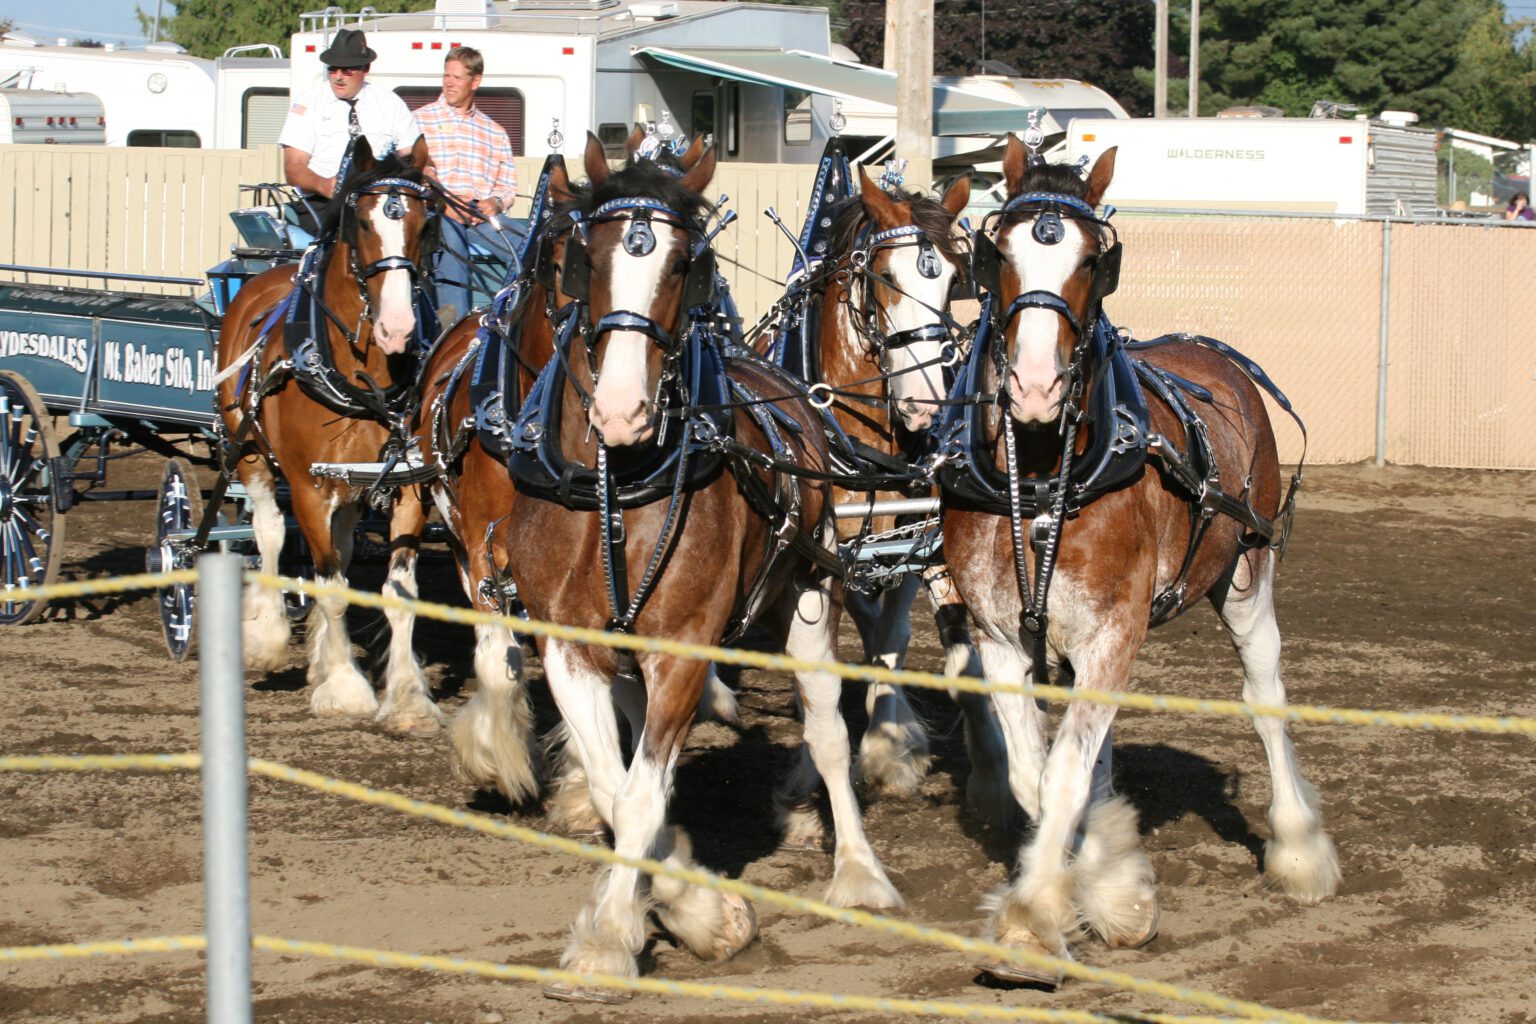 A six-horse hitch of Clydesdales performs a tight turn during the "Lynden Fair Free Drive